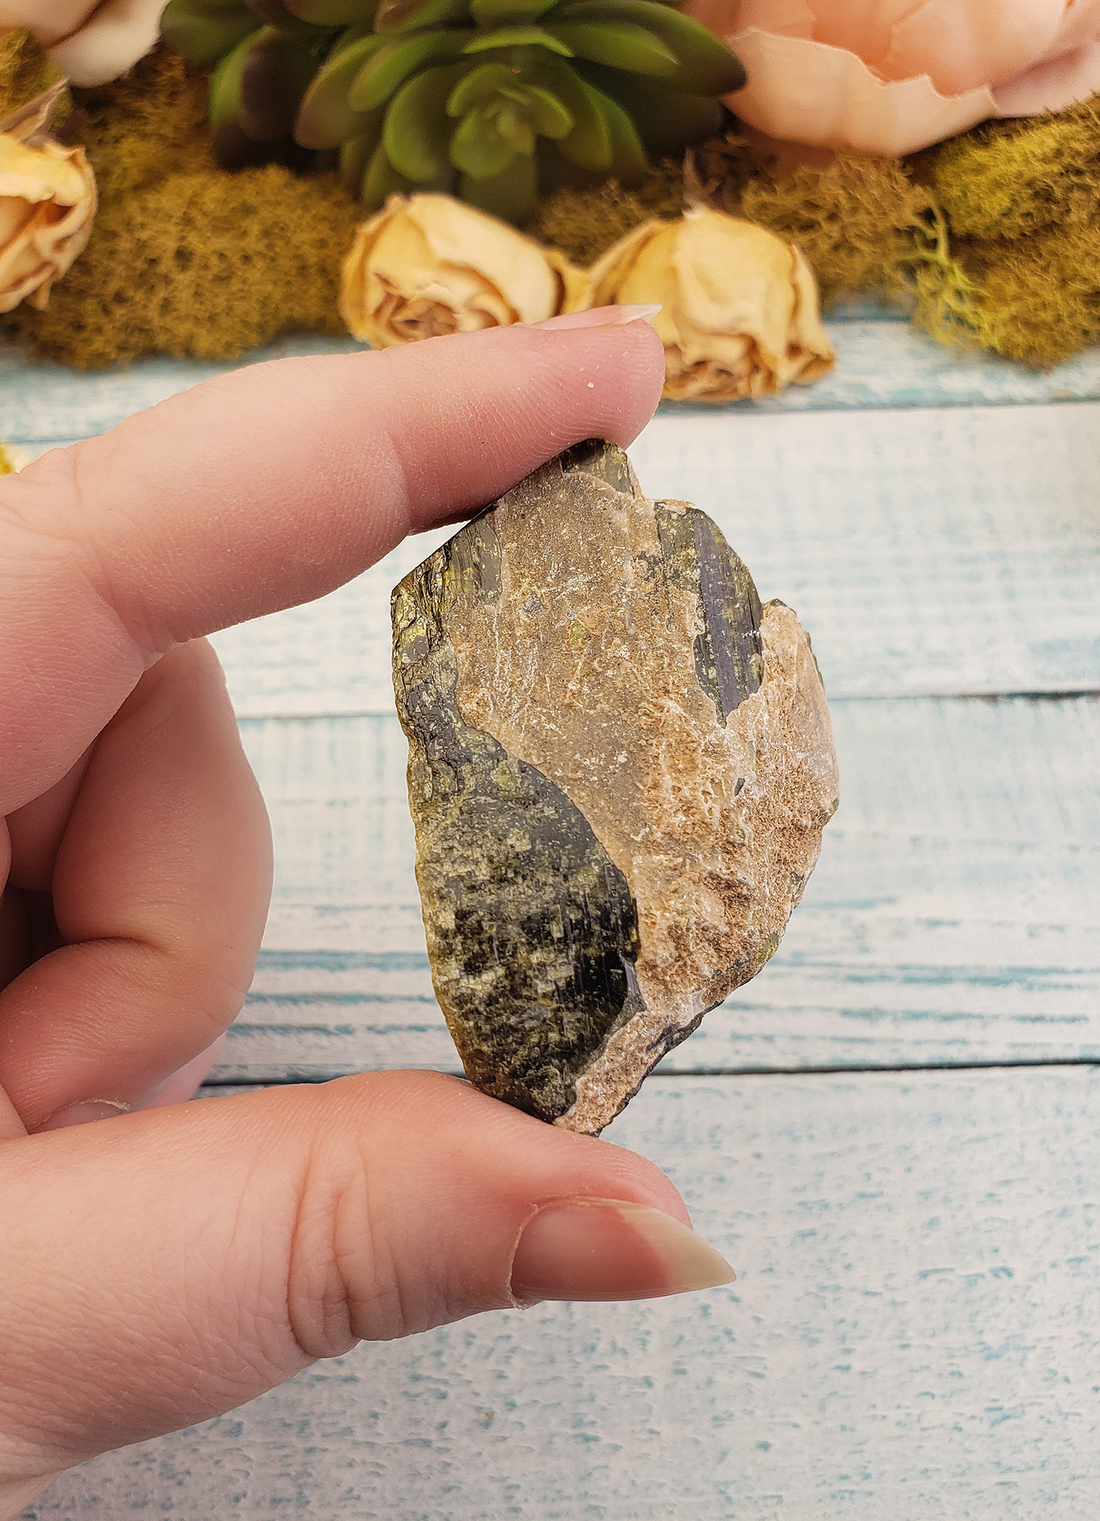 Epidote Pistacite Gemstone Natural Cluster - Large One Stone in Hand